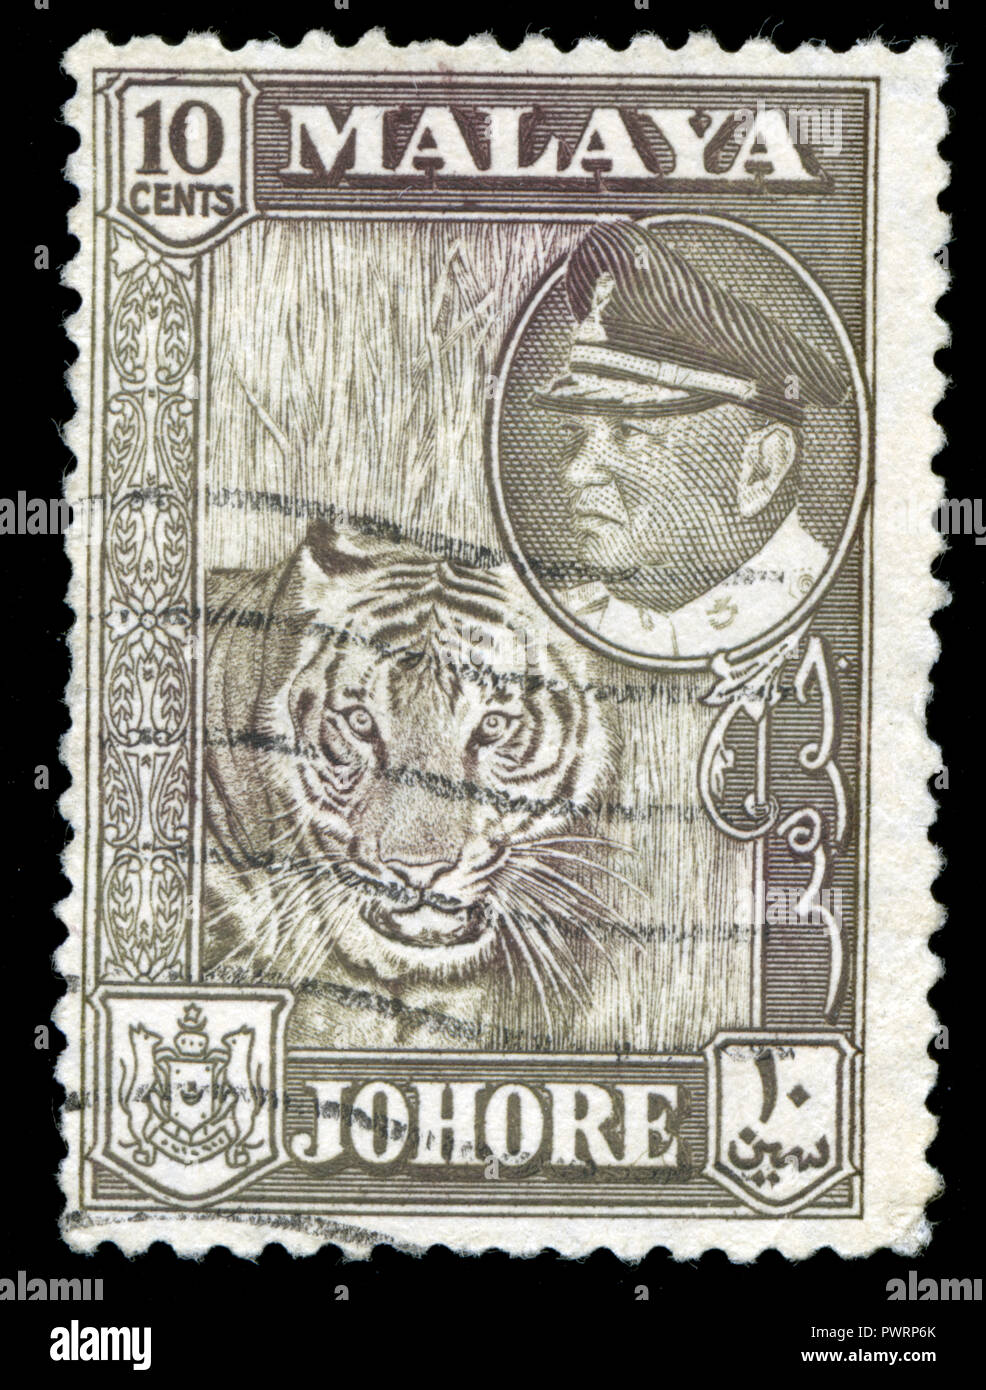 Postmarked stamp from the Federal Malay States in the Johore series issued in 1960 Stock Photo